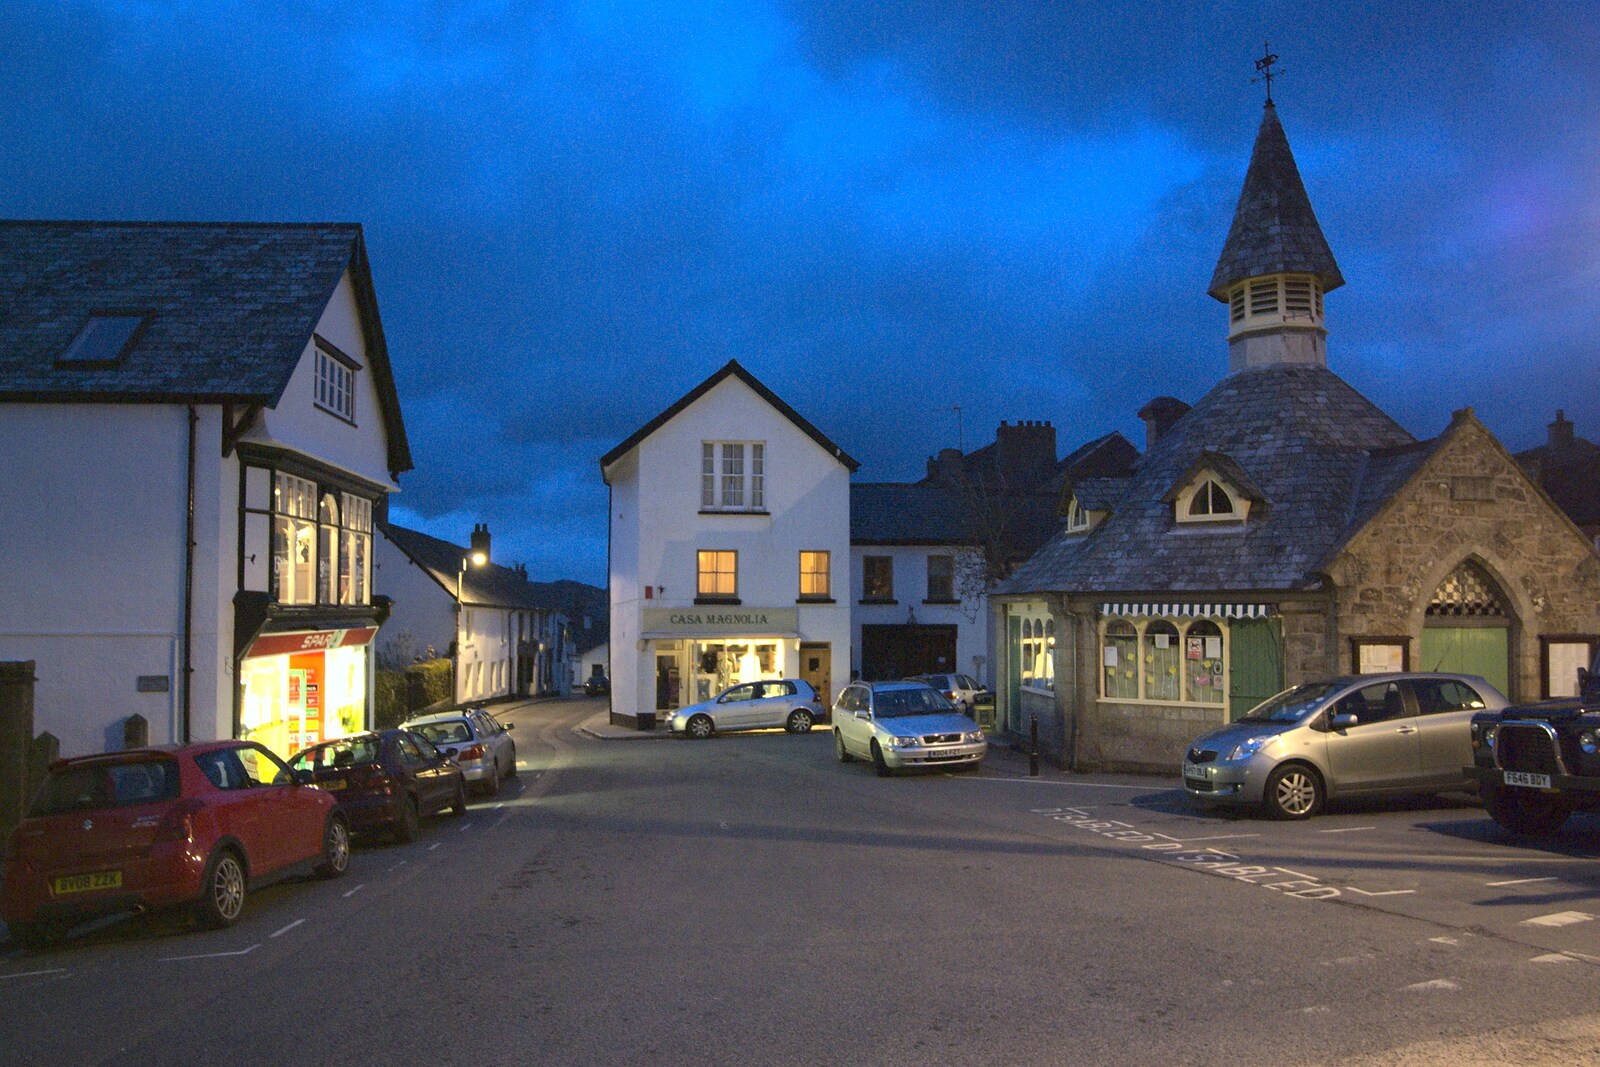 Chagford Spar in the gathering dusk from Easter in Chagford and Hoo Meavy, Devon - 3rd April 2010